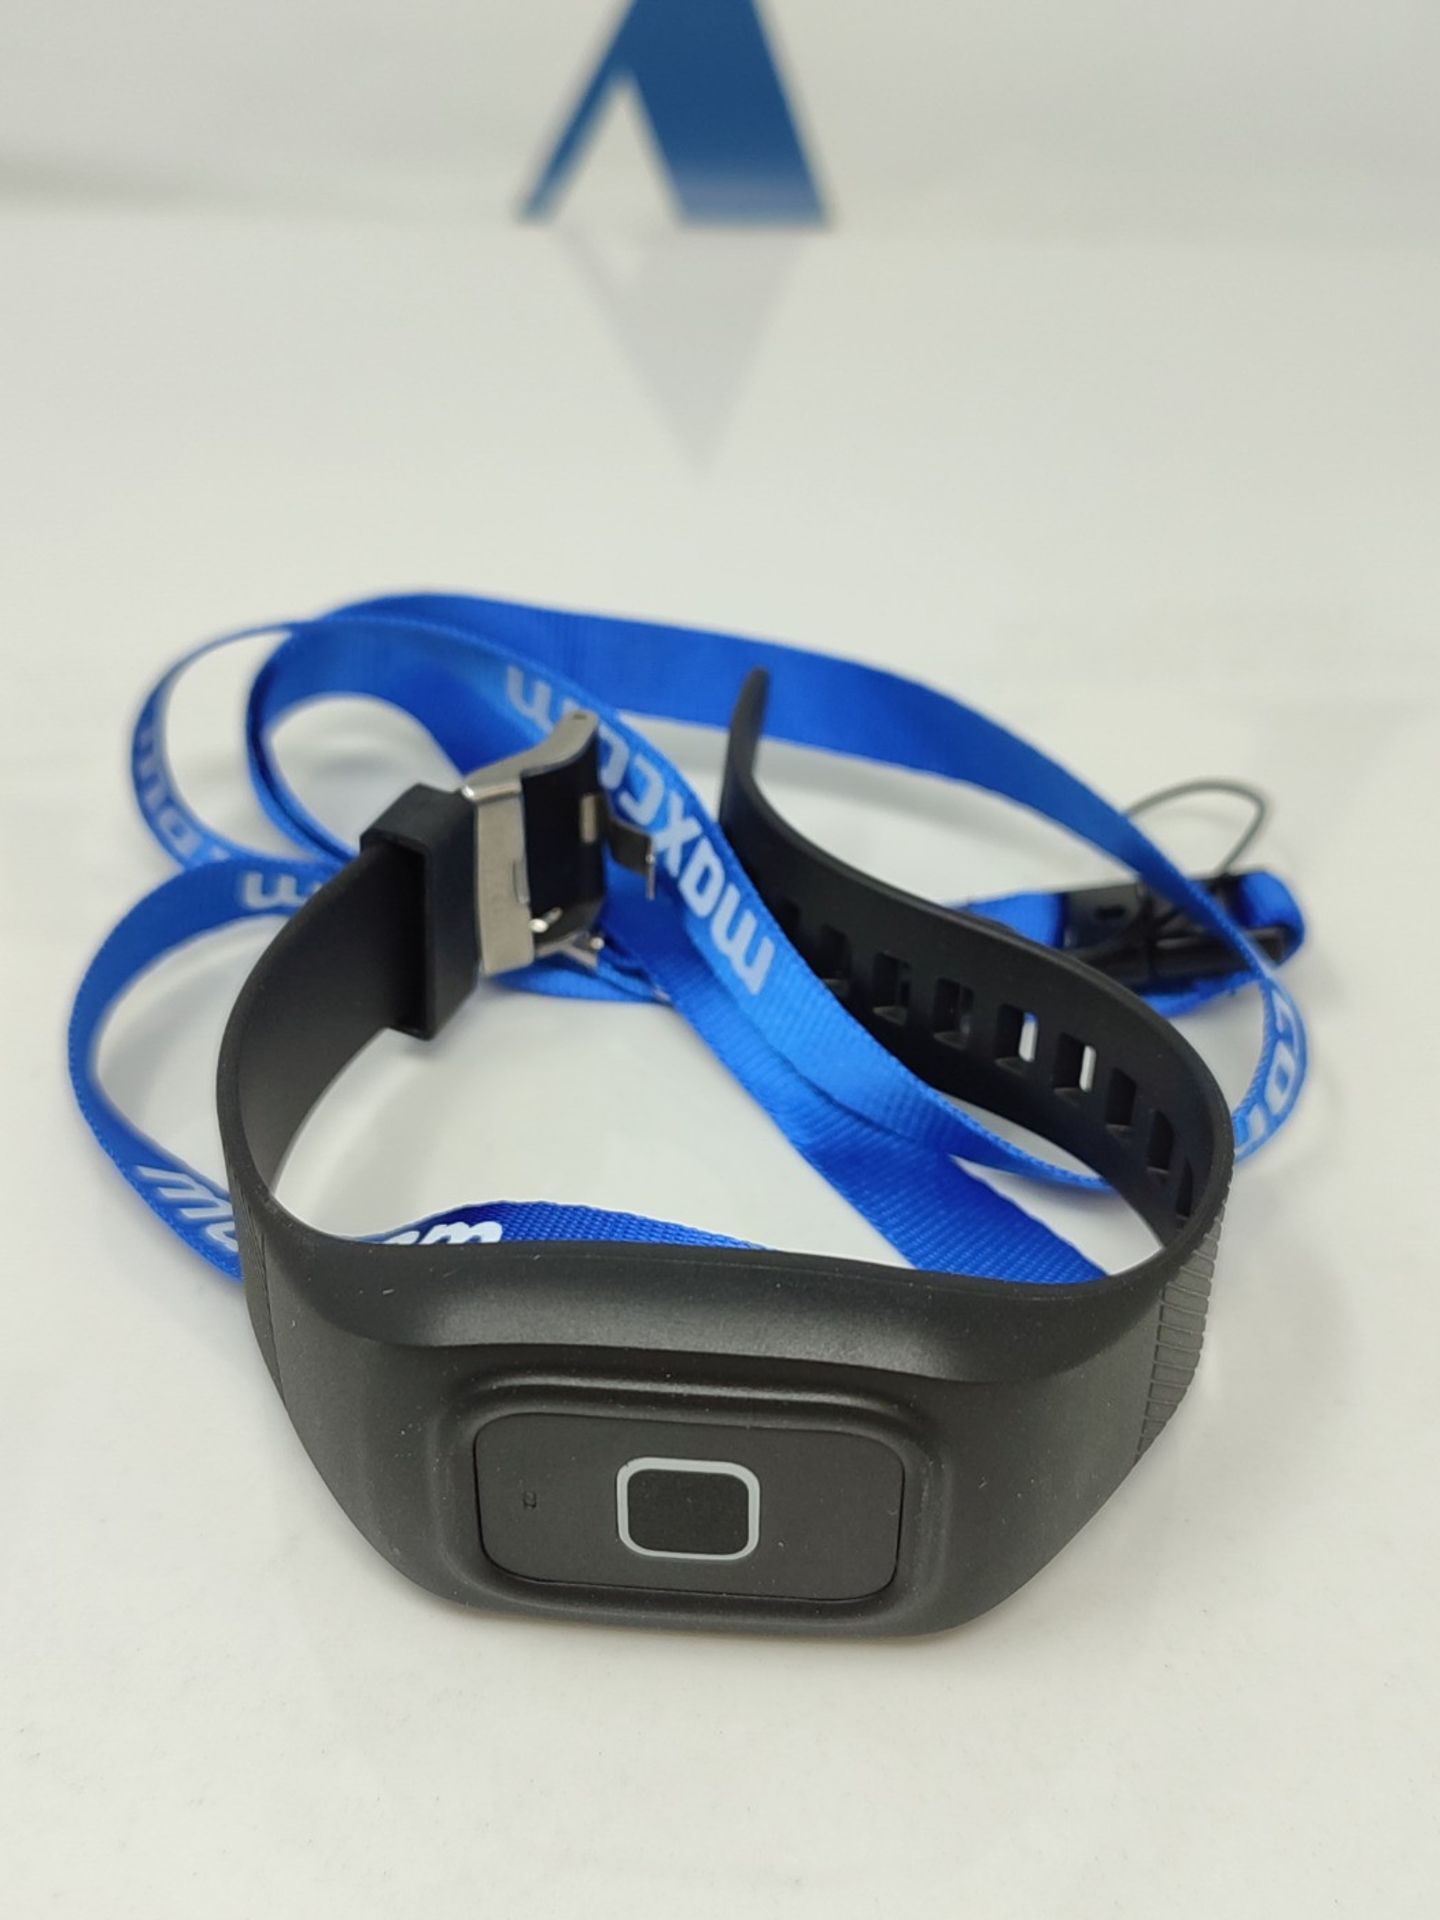 Maxcom FW735 - Emergency call bracelet for seniors, adults, with SOS emergency button, - Image 2 of 4